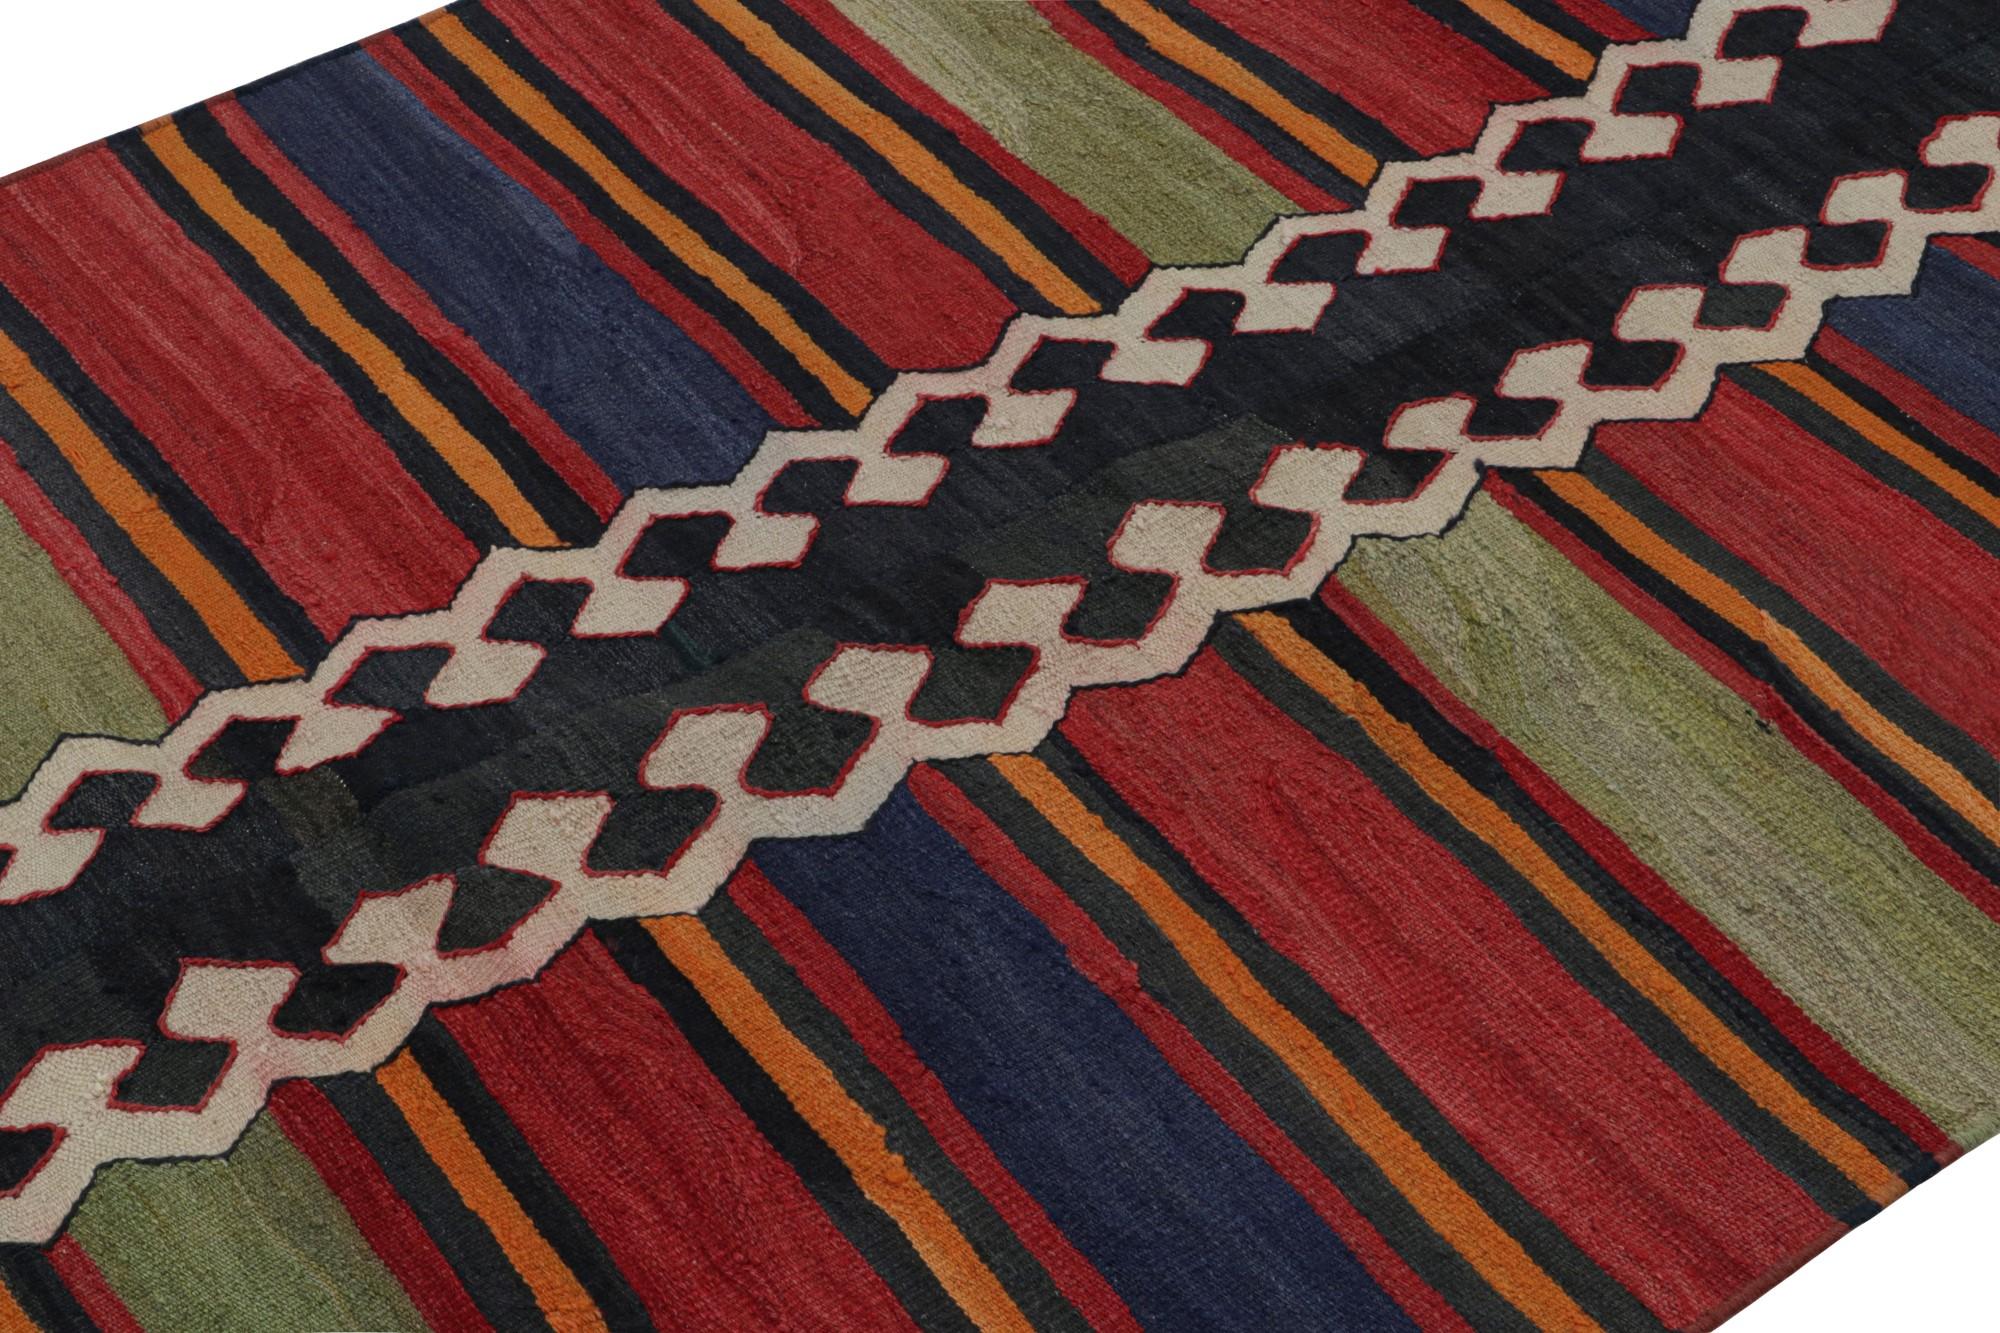 Hand-Woven Vintage Tribal Kilim rug in Polychromatic Geometric Patterns by Rug & Kilim For Sale